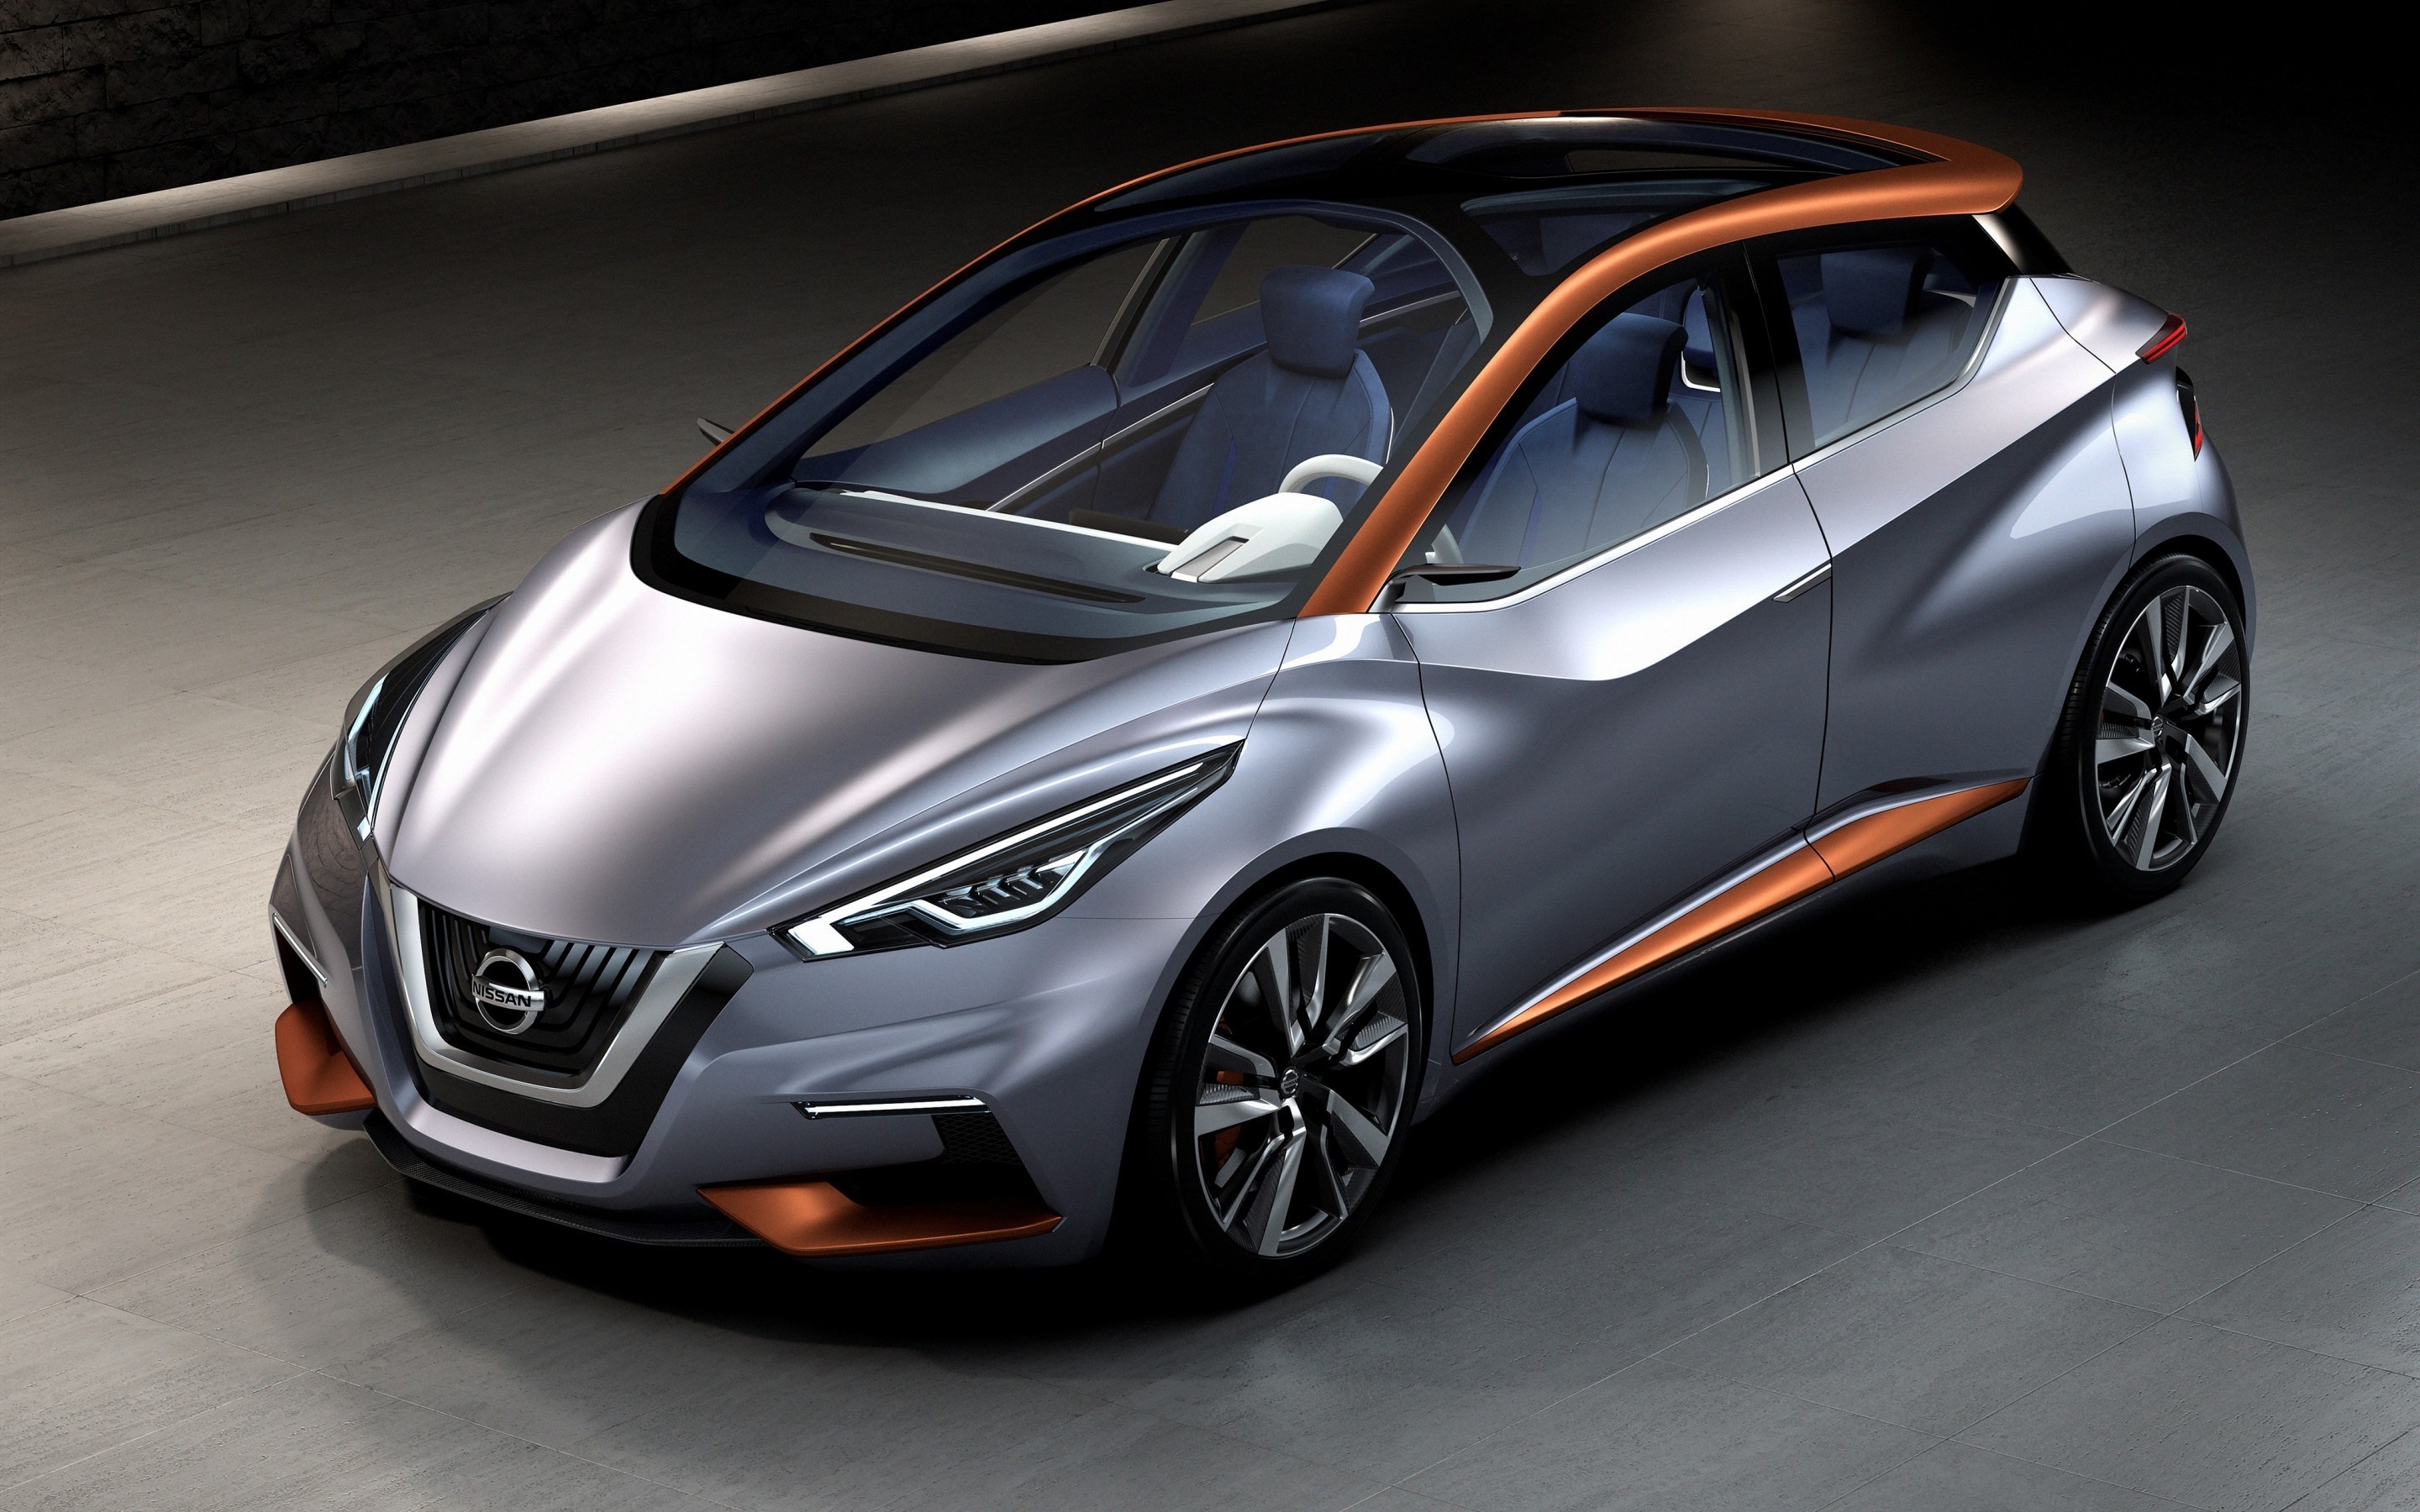 2015 Nissan Sway Concept for 2880 x 1800 Retina Display resolution